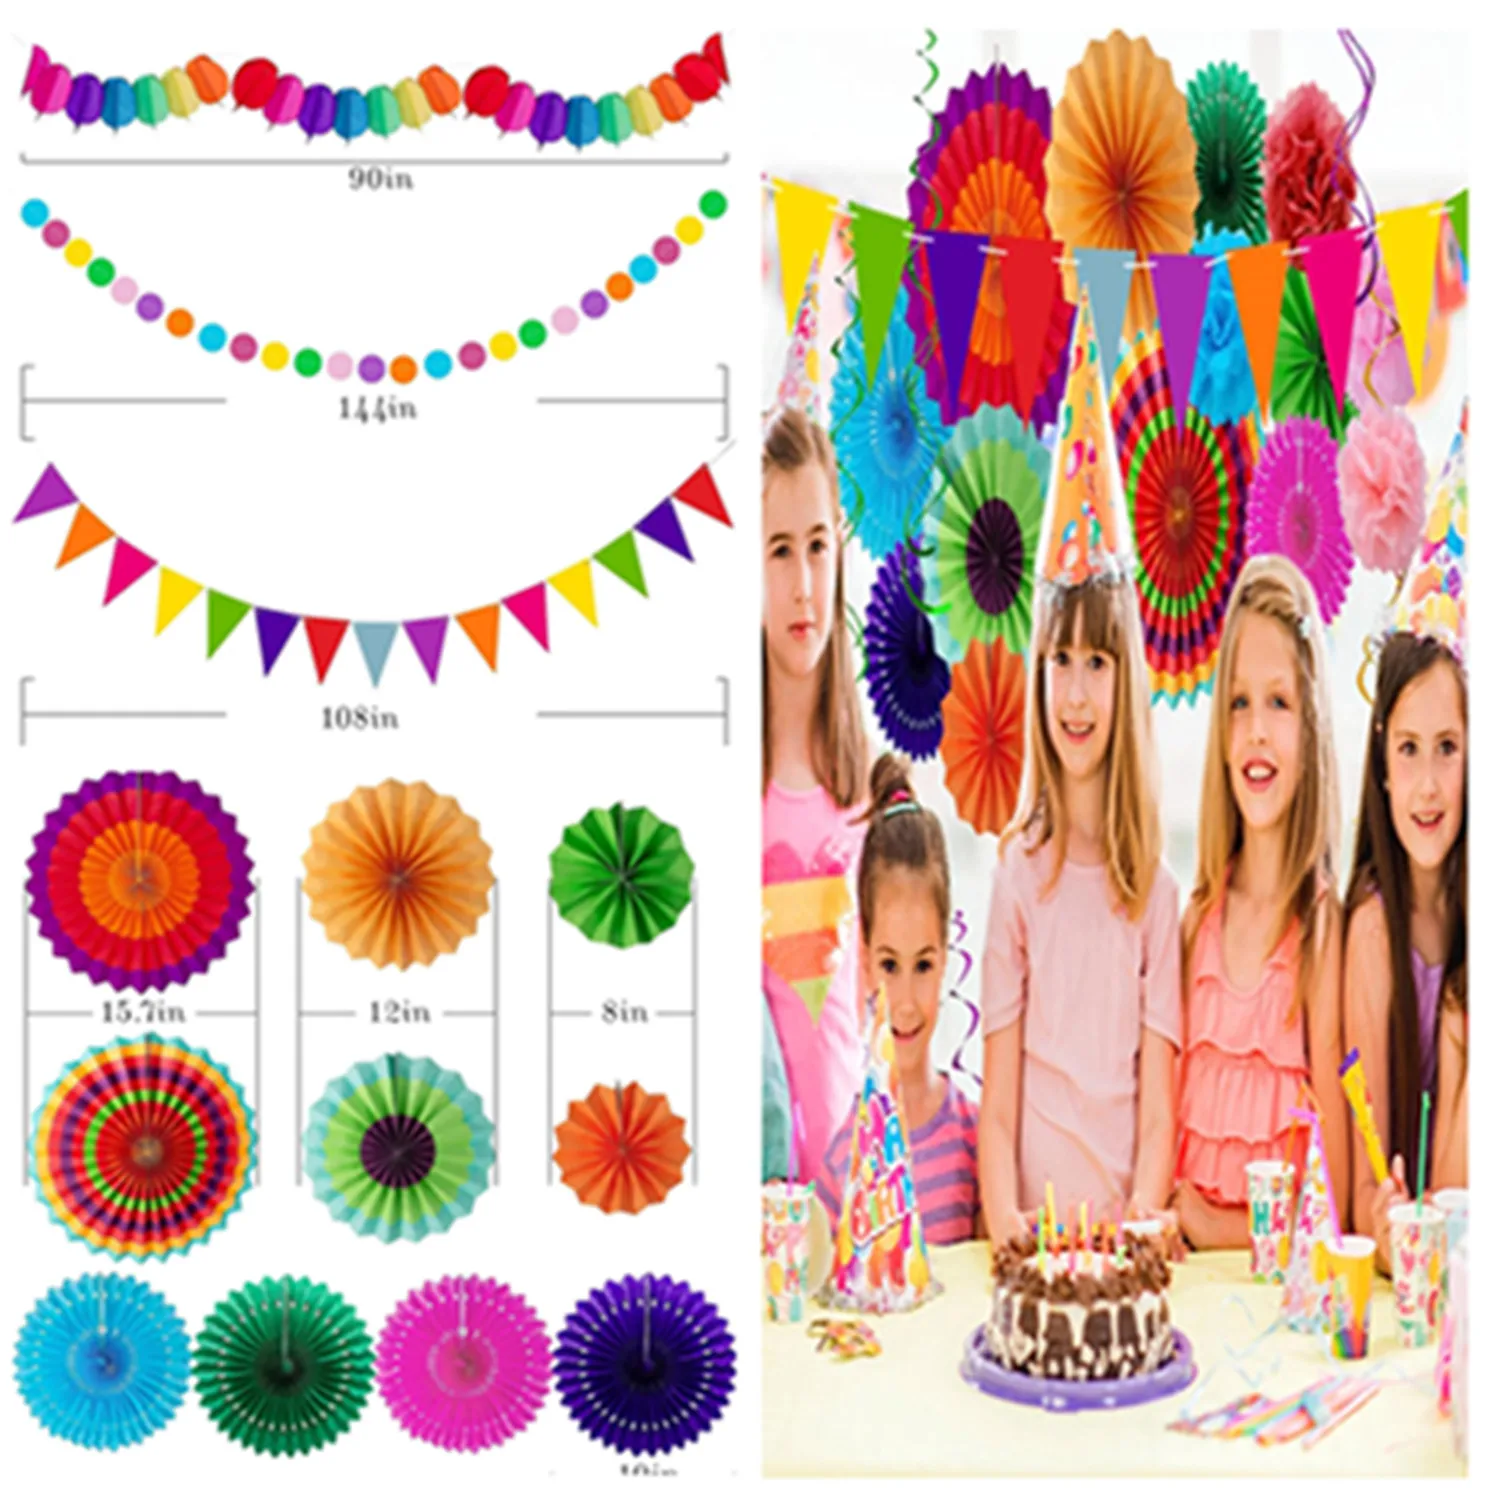 Huryfox Fiesta Party Decorations - 33pcs Colorful Mexican Themed Hanging  Paper Fans, Rainbow Paper Pom Poms, Fiesta Bunting and Tissue Paper  Streamers